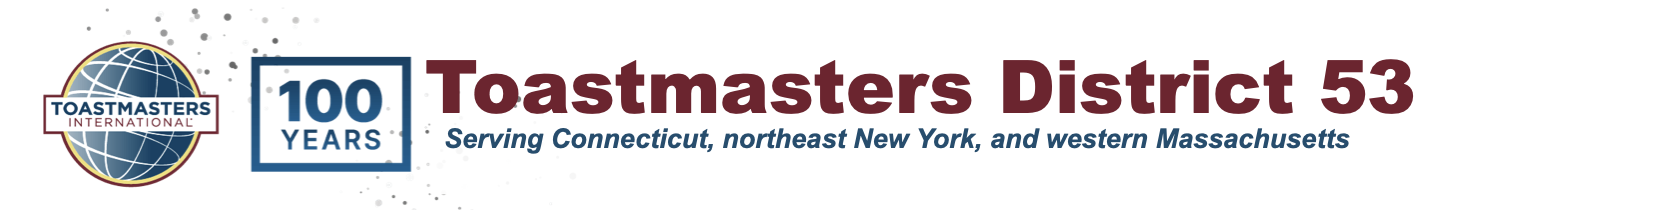 District 53 Toastmasters